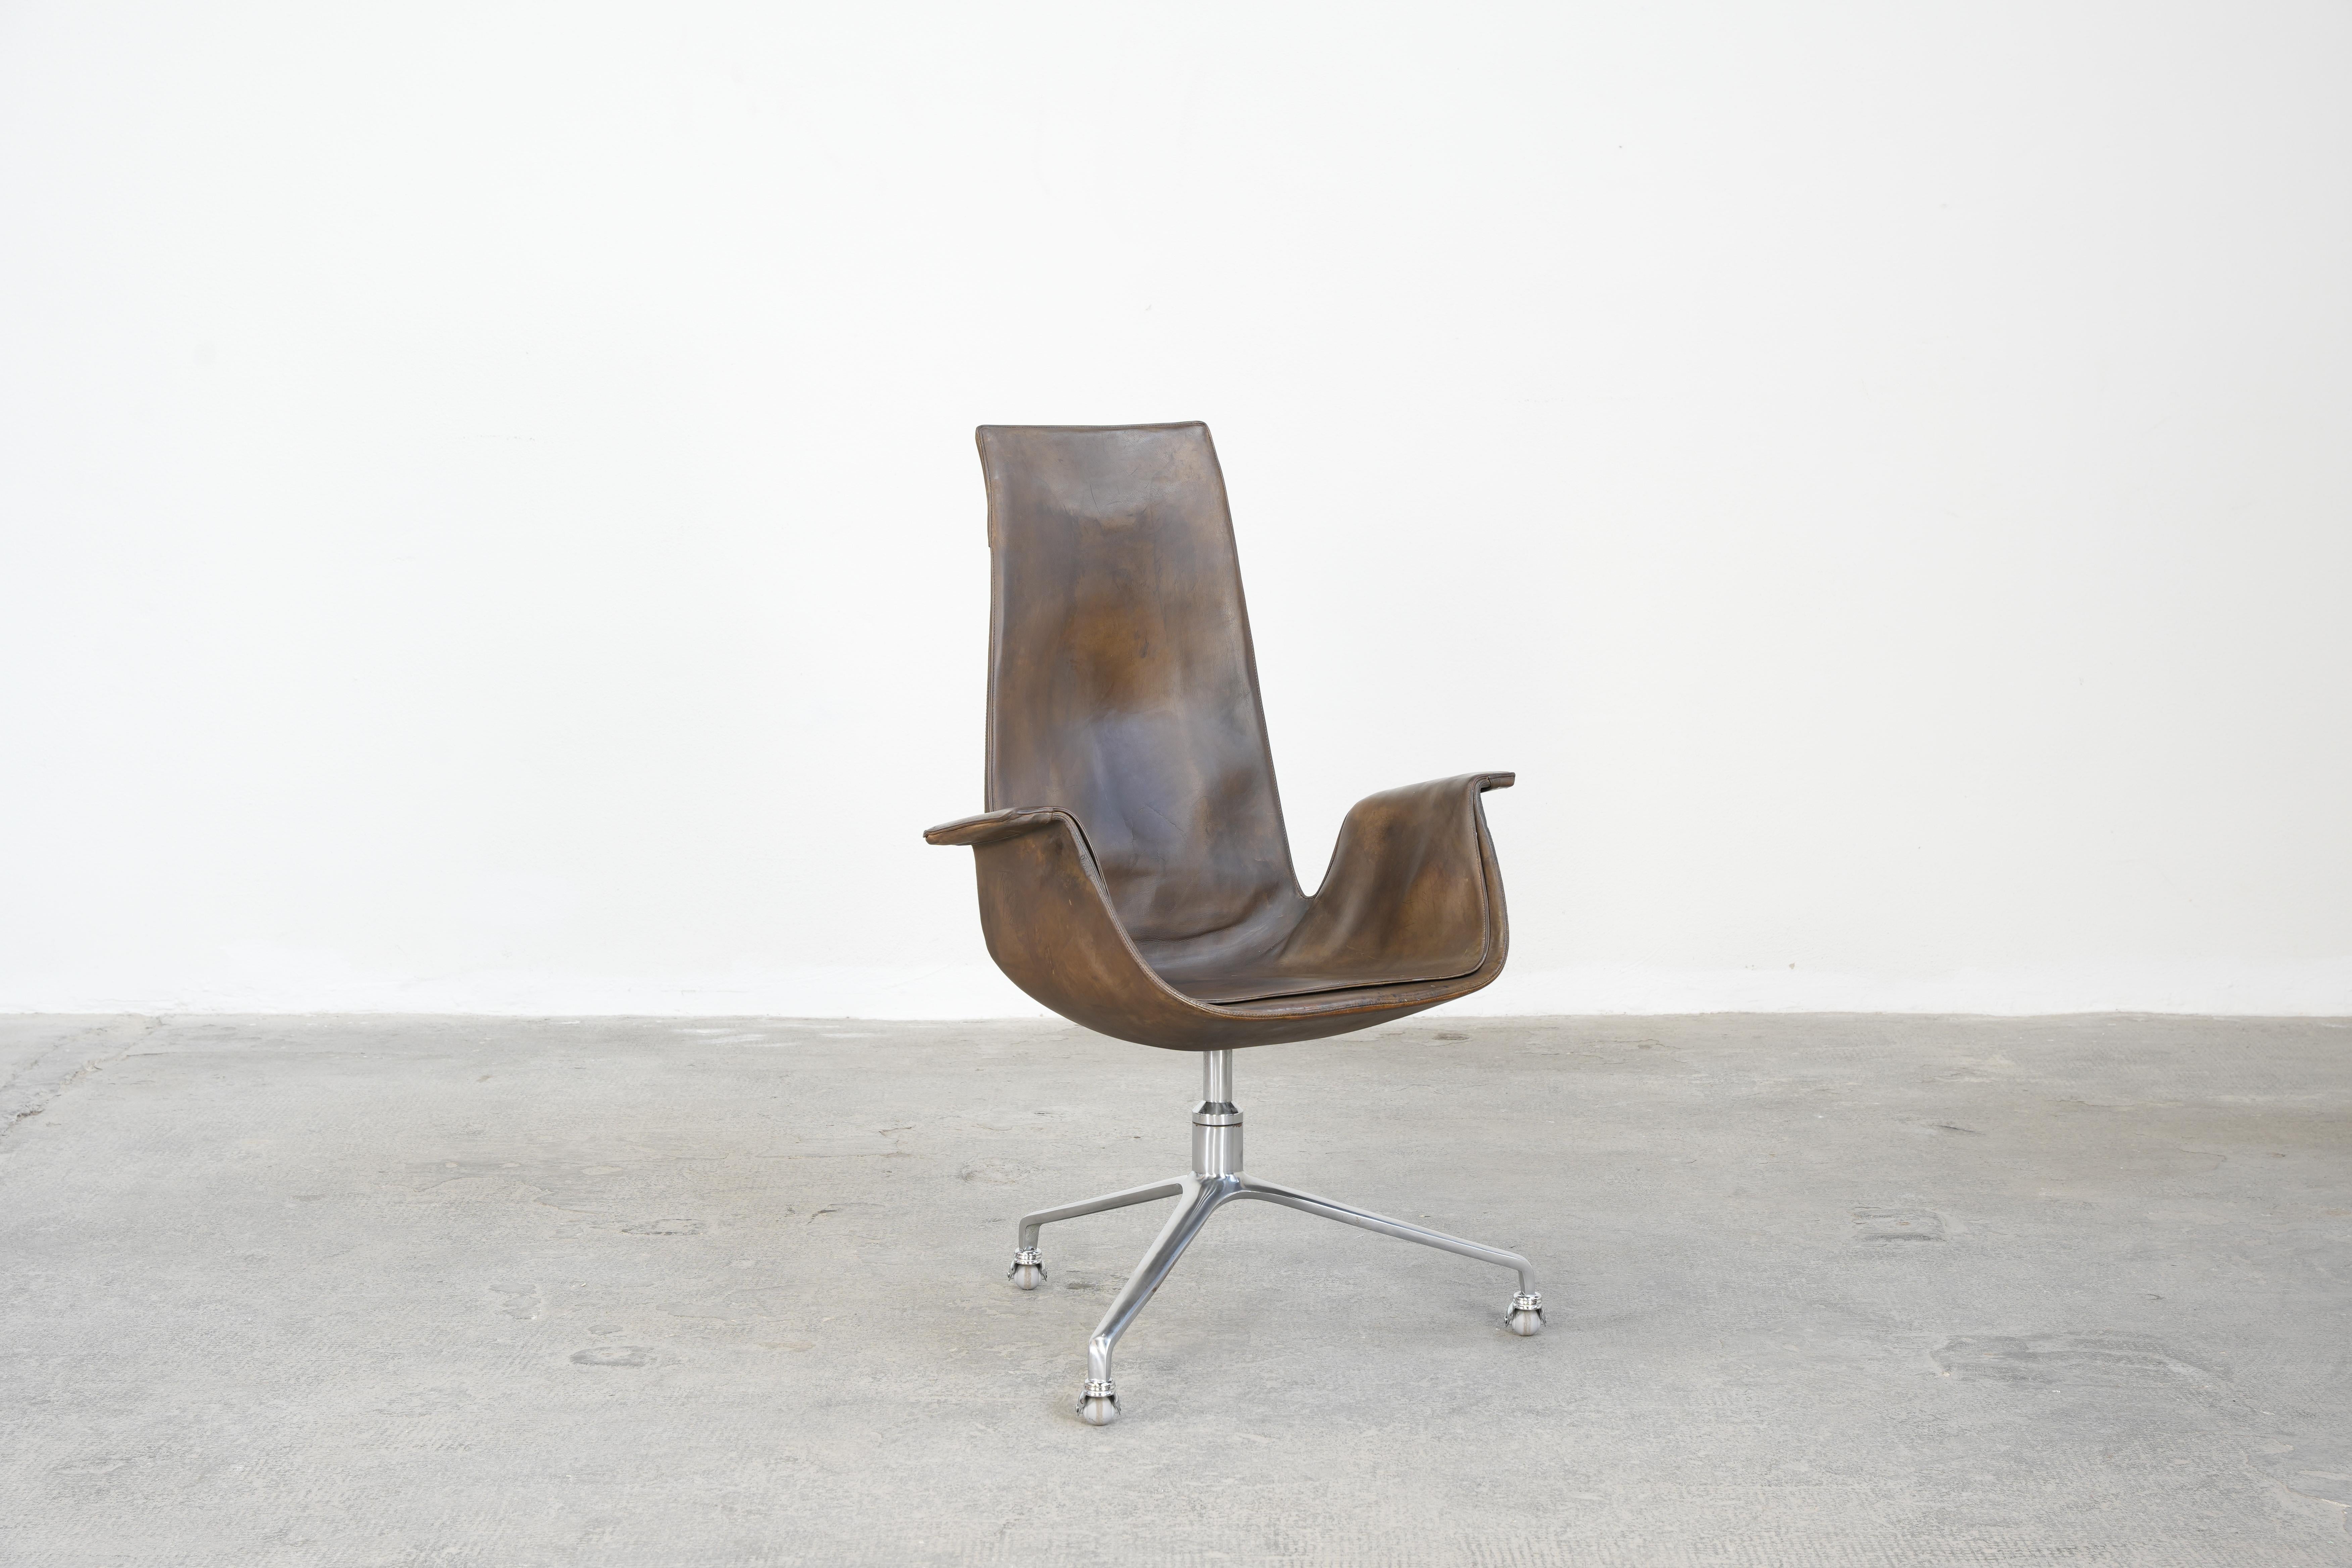 Beautiful tulip chair designed by Preben Fabricius and Jørgen Kastholm and produced by Alfred Kill International. 
The chair comes in original condition with beautifully patinated leather in dark cognac brown.
Overall the chair is in a very good